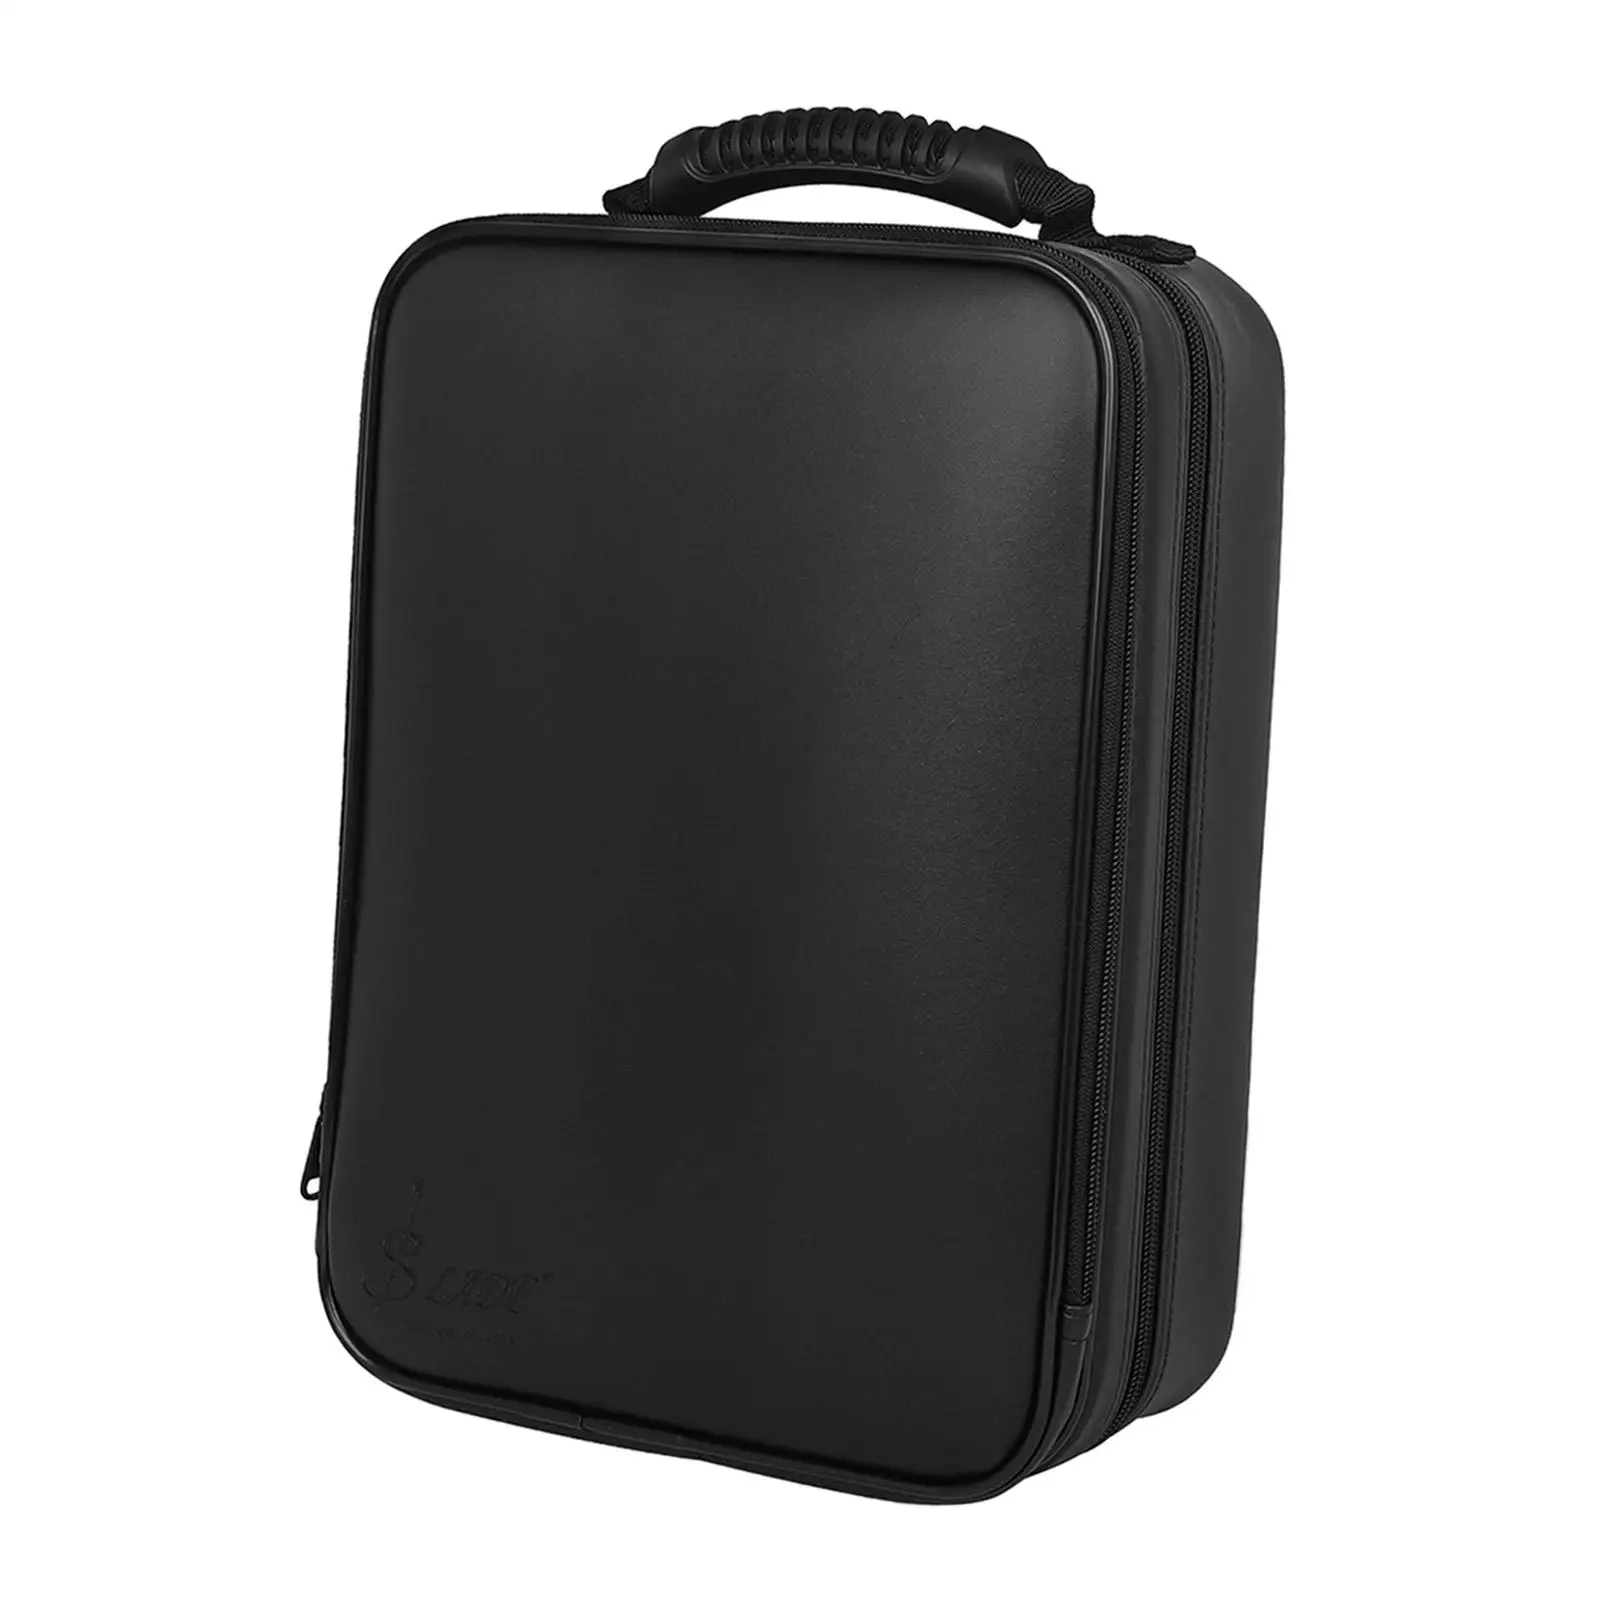 Clarinet Storage Case with Shoulder Strap, Musical Instrument Storage Bag, Durable PU Leather Clarinet Bag for Outdoor